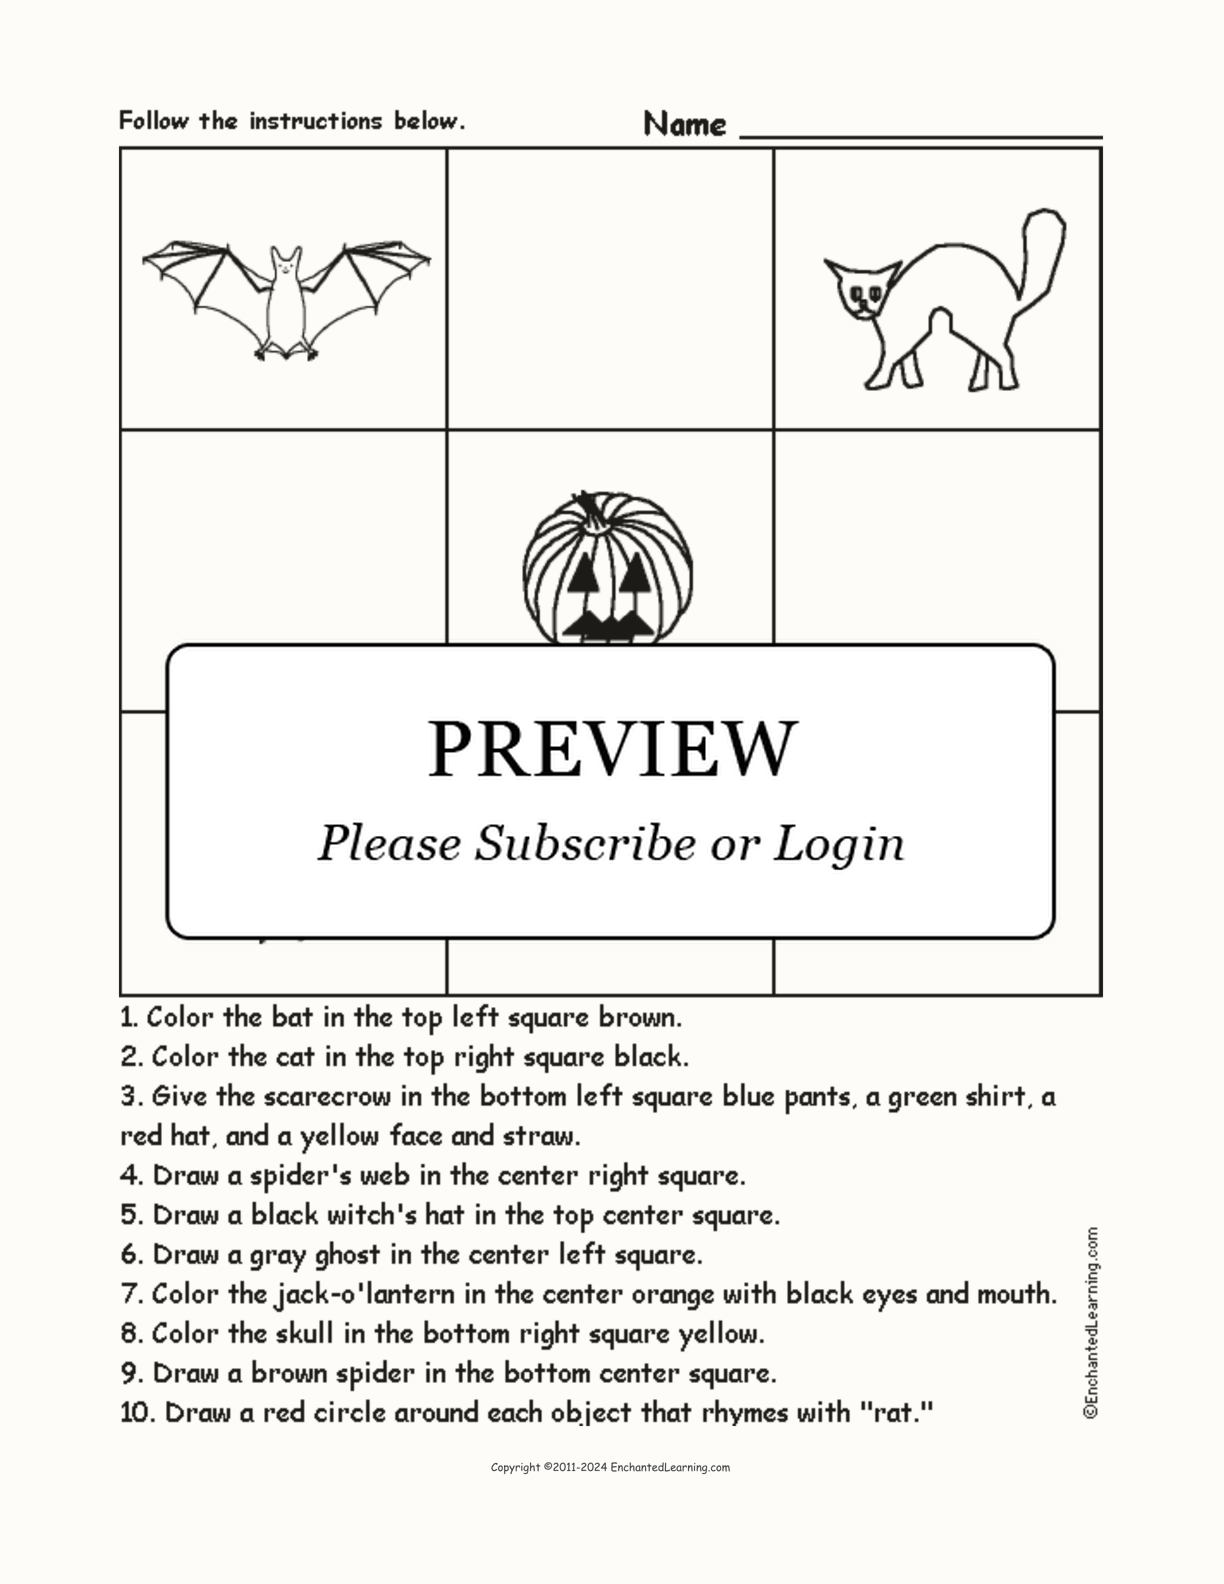 Halloween - Follow the Instructions interactive worksheet page 1